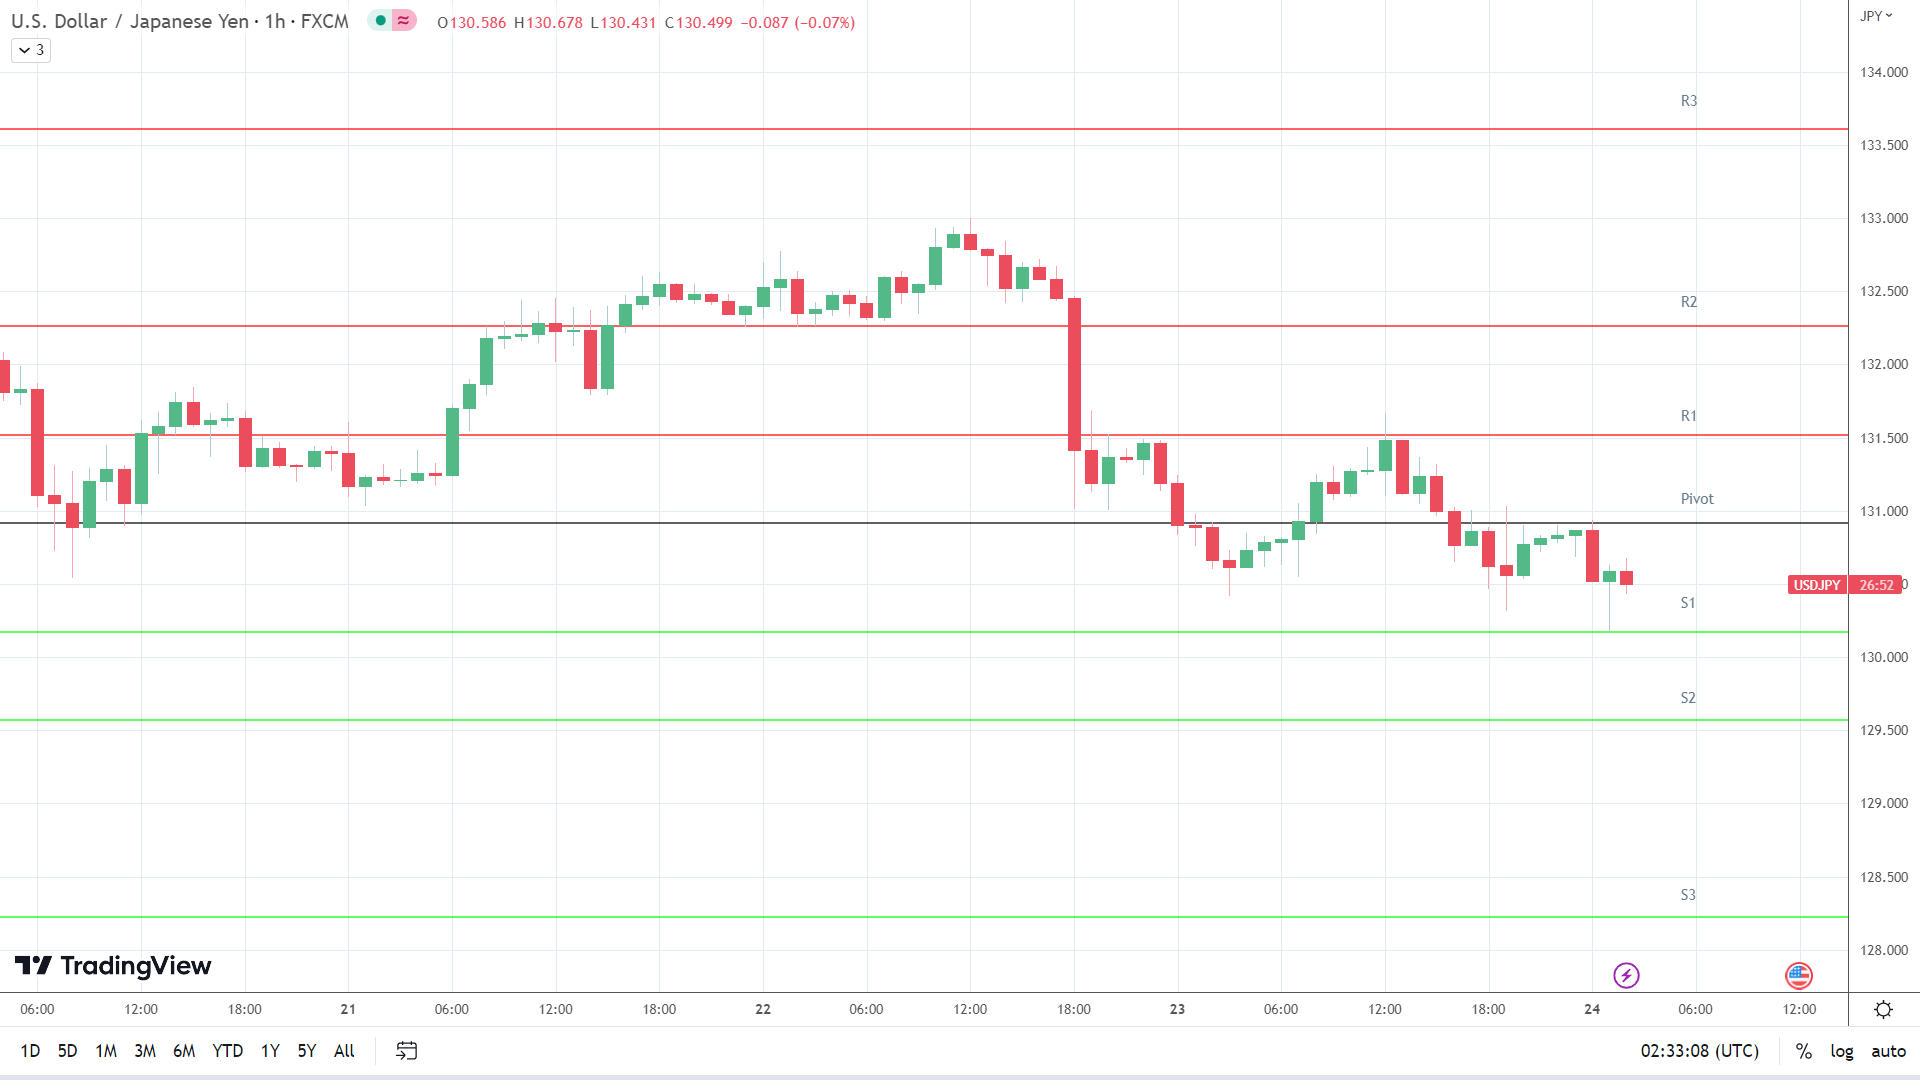 USD/JPY support levels in play below the pivot.